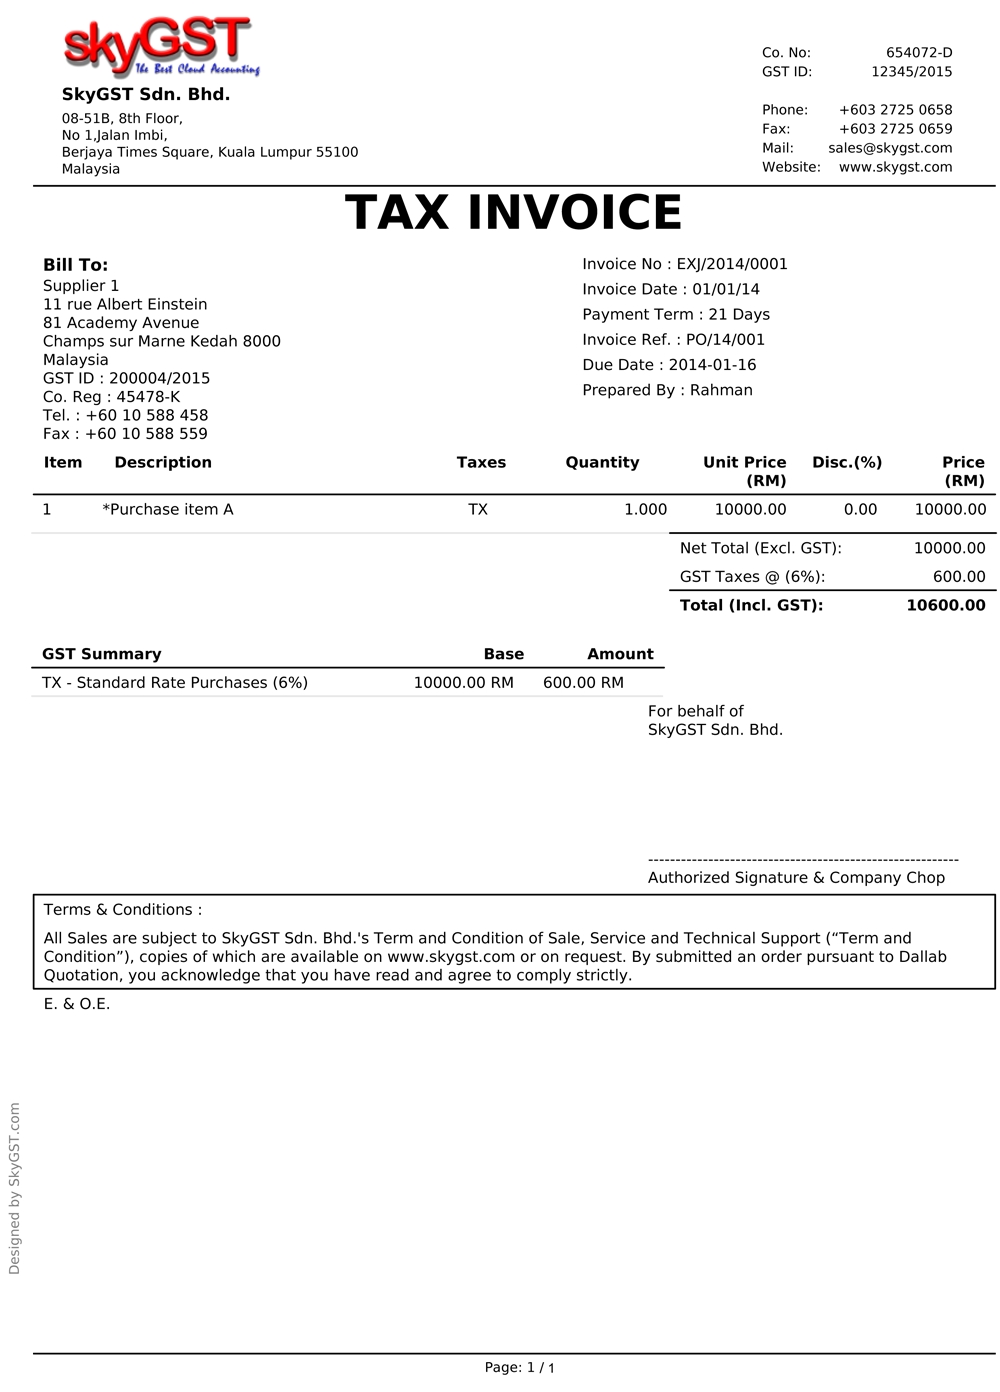 this tax invoice ok or not gst on invoices